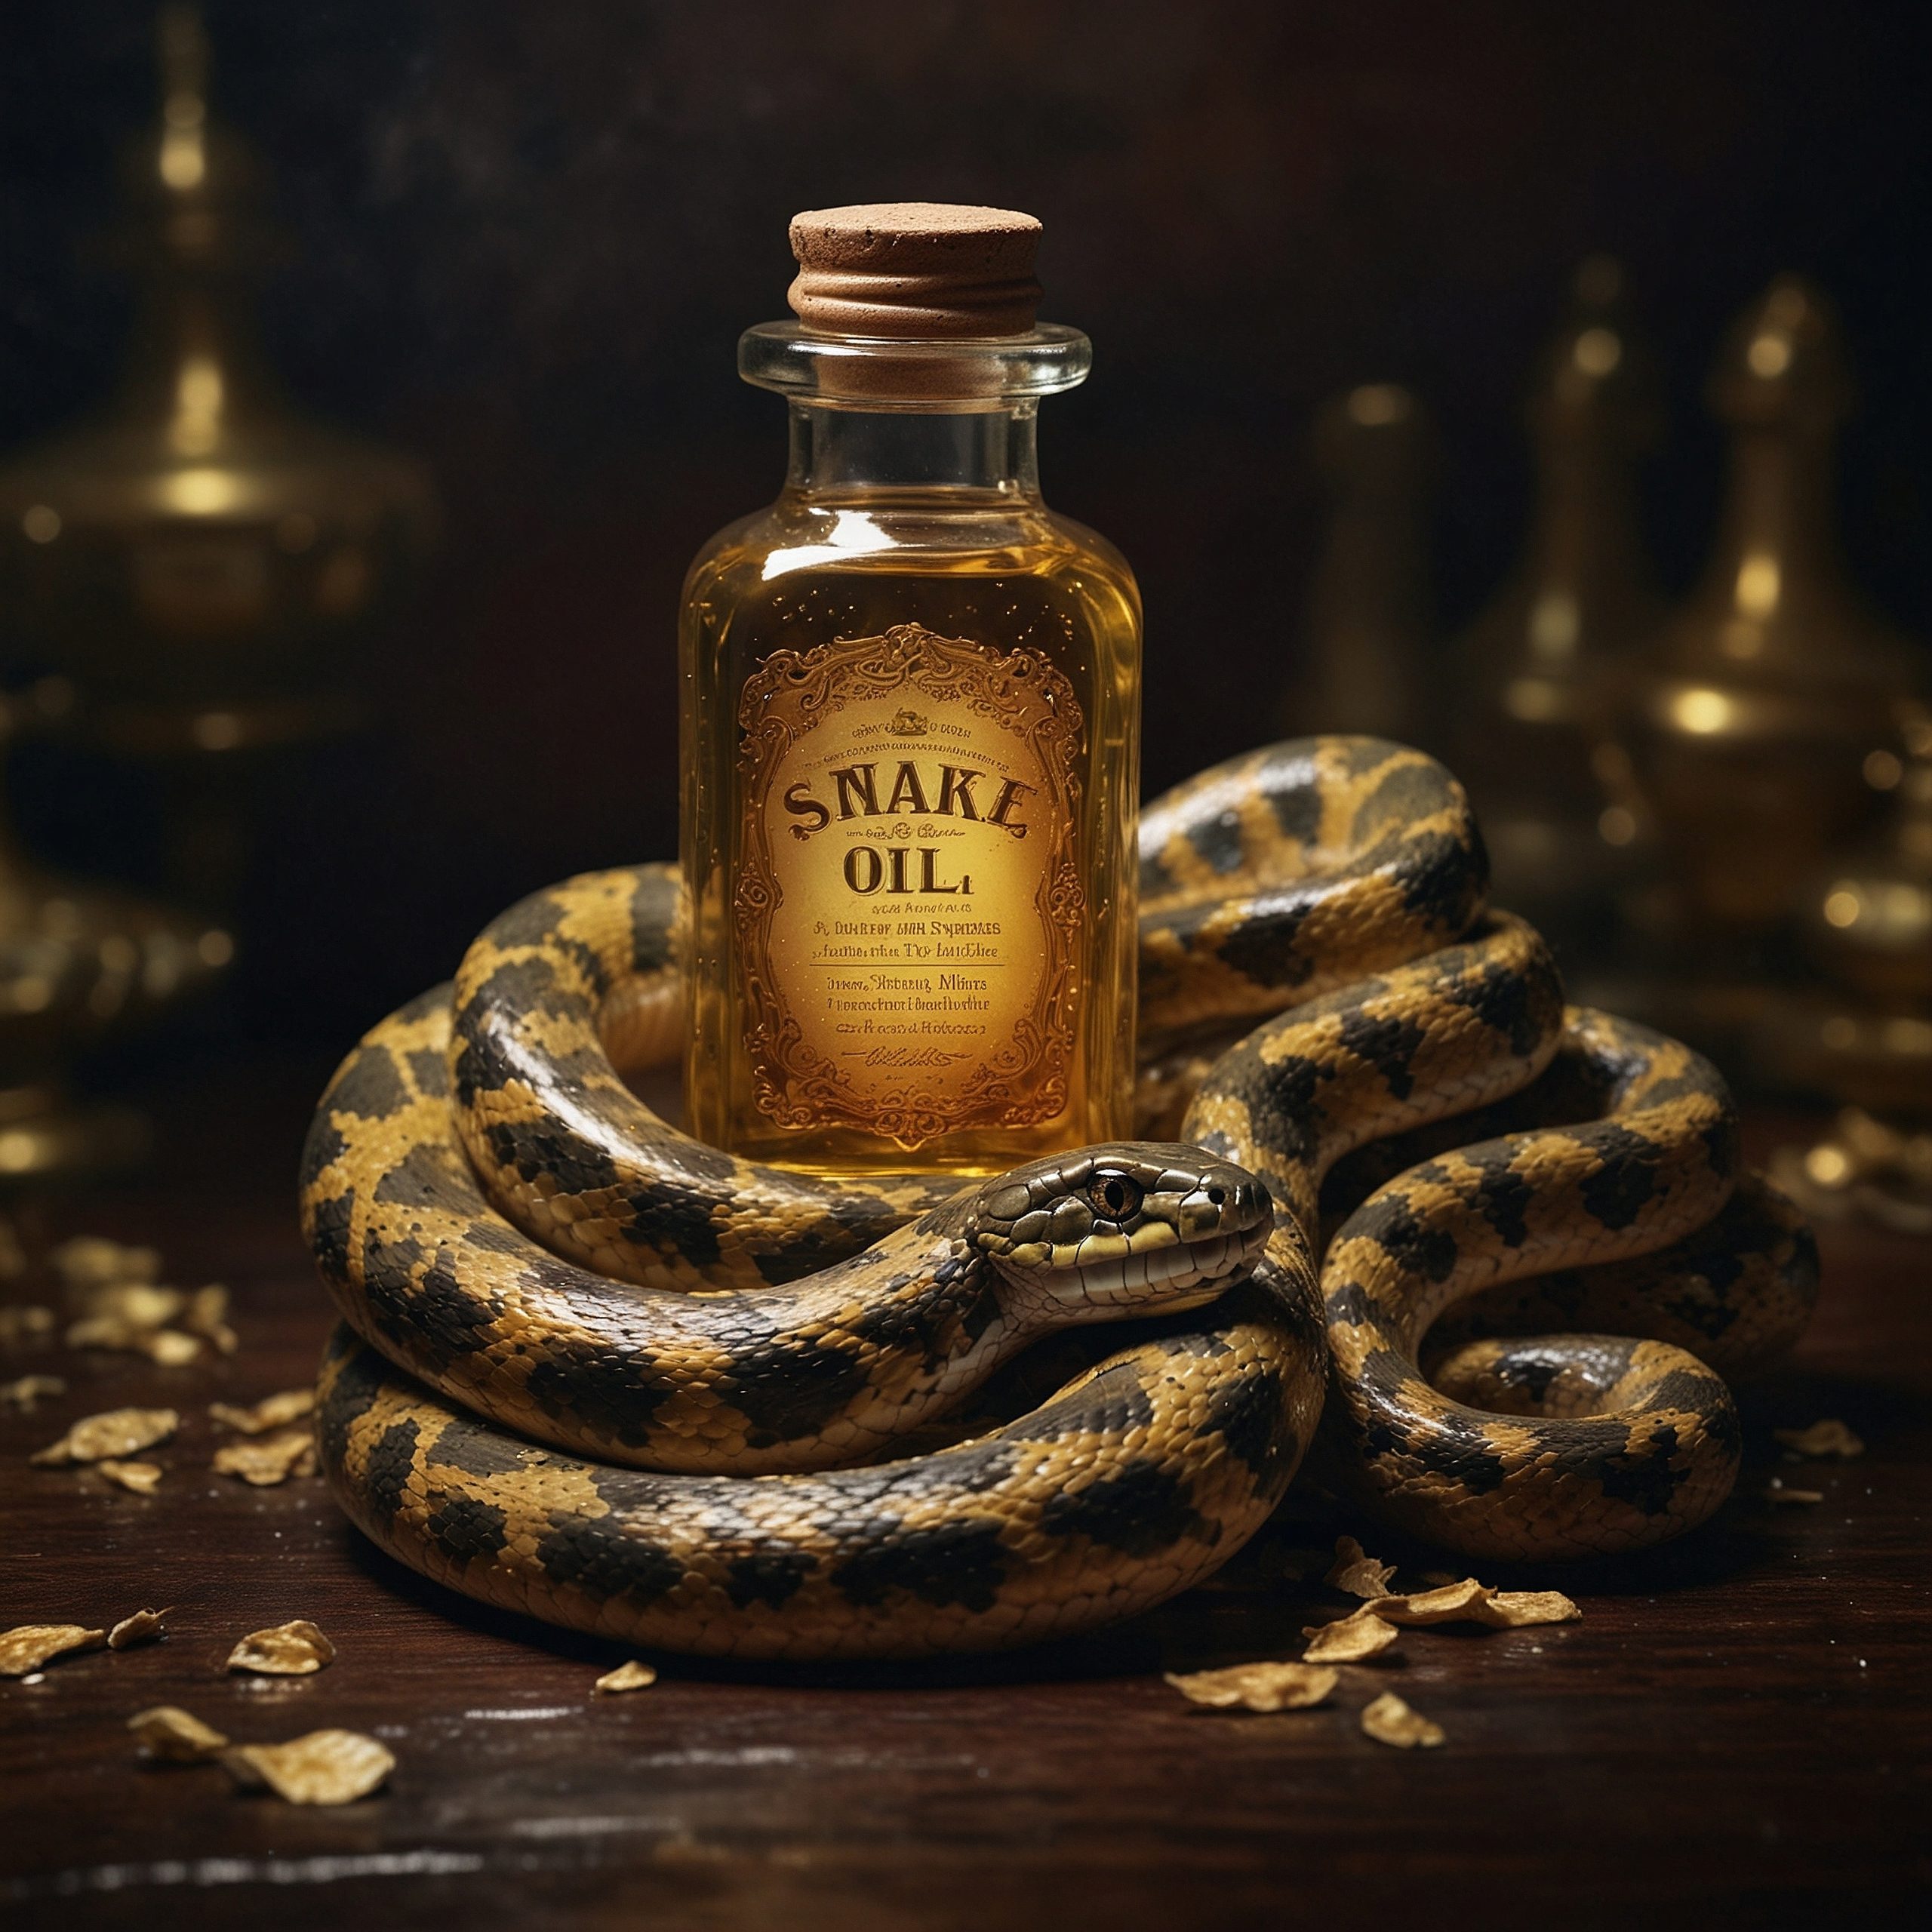 High Fidelity or High Fantasy? 6 of the Snakiest Oils in Audio